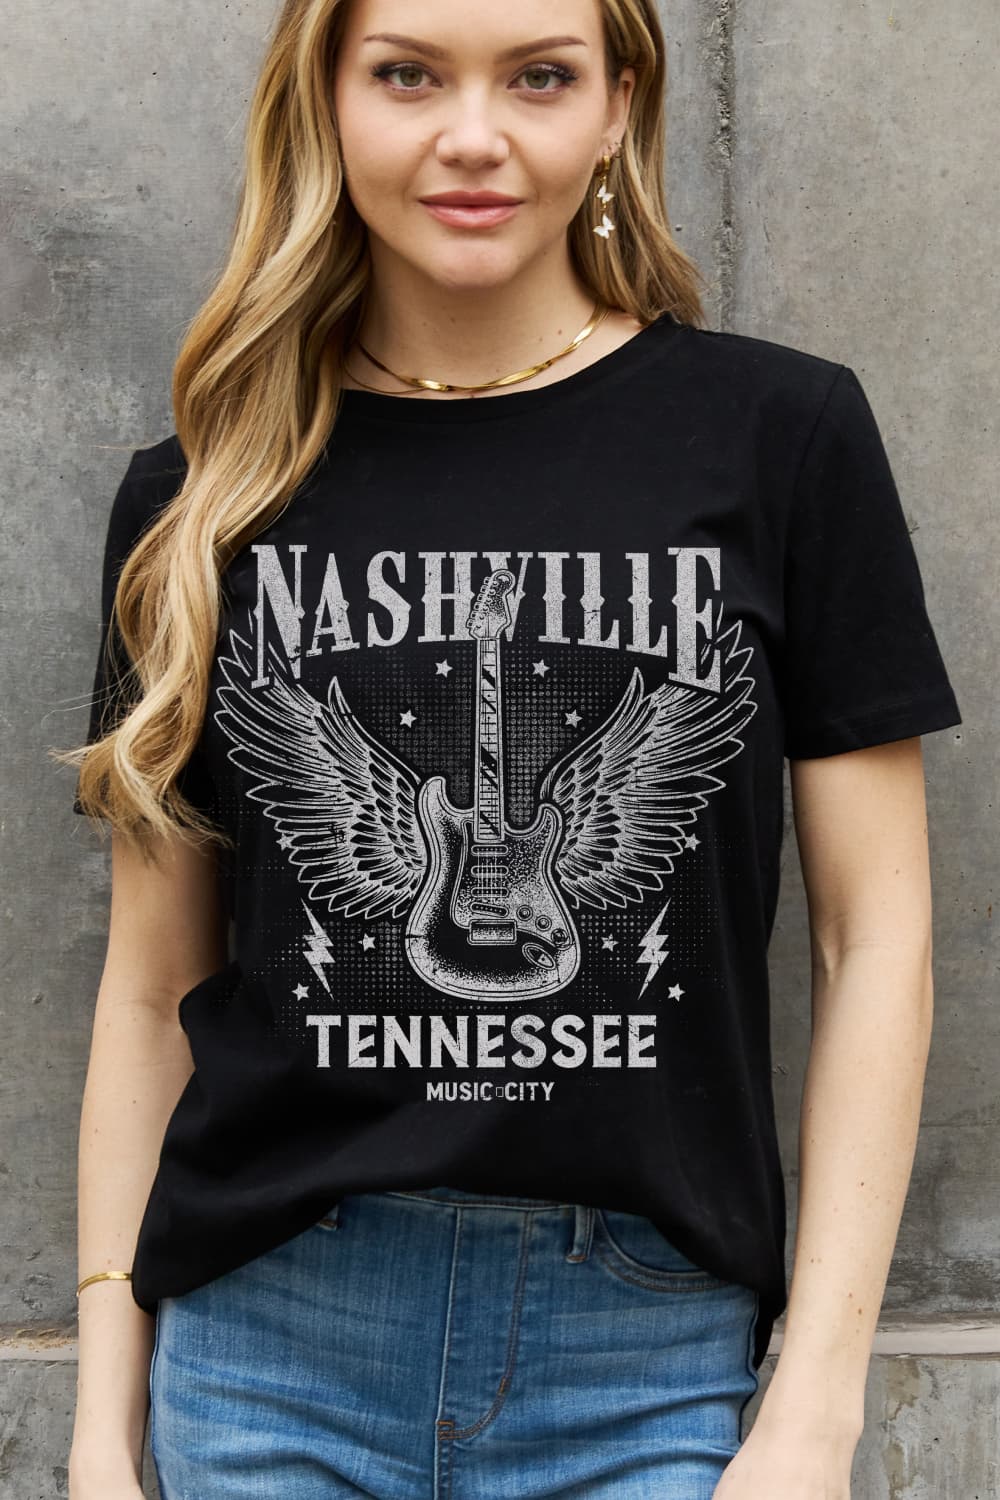 Simply Love Full Size NASHVILLE TENNESSEE MUSIC CITY Graphic Cotton Tee